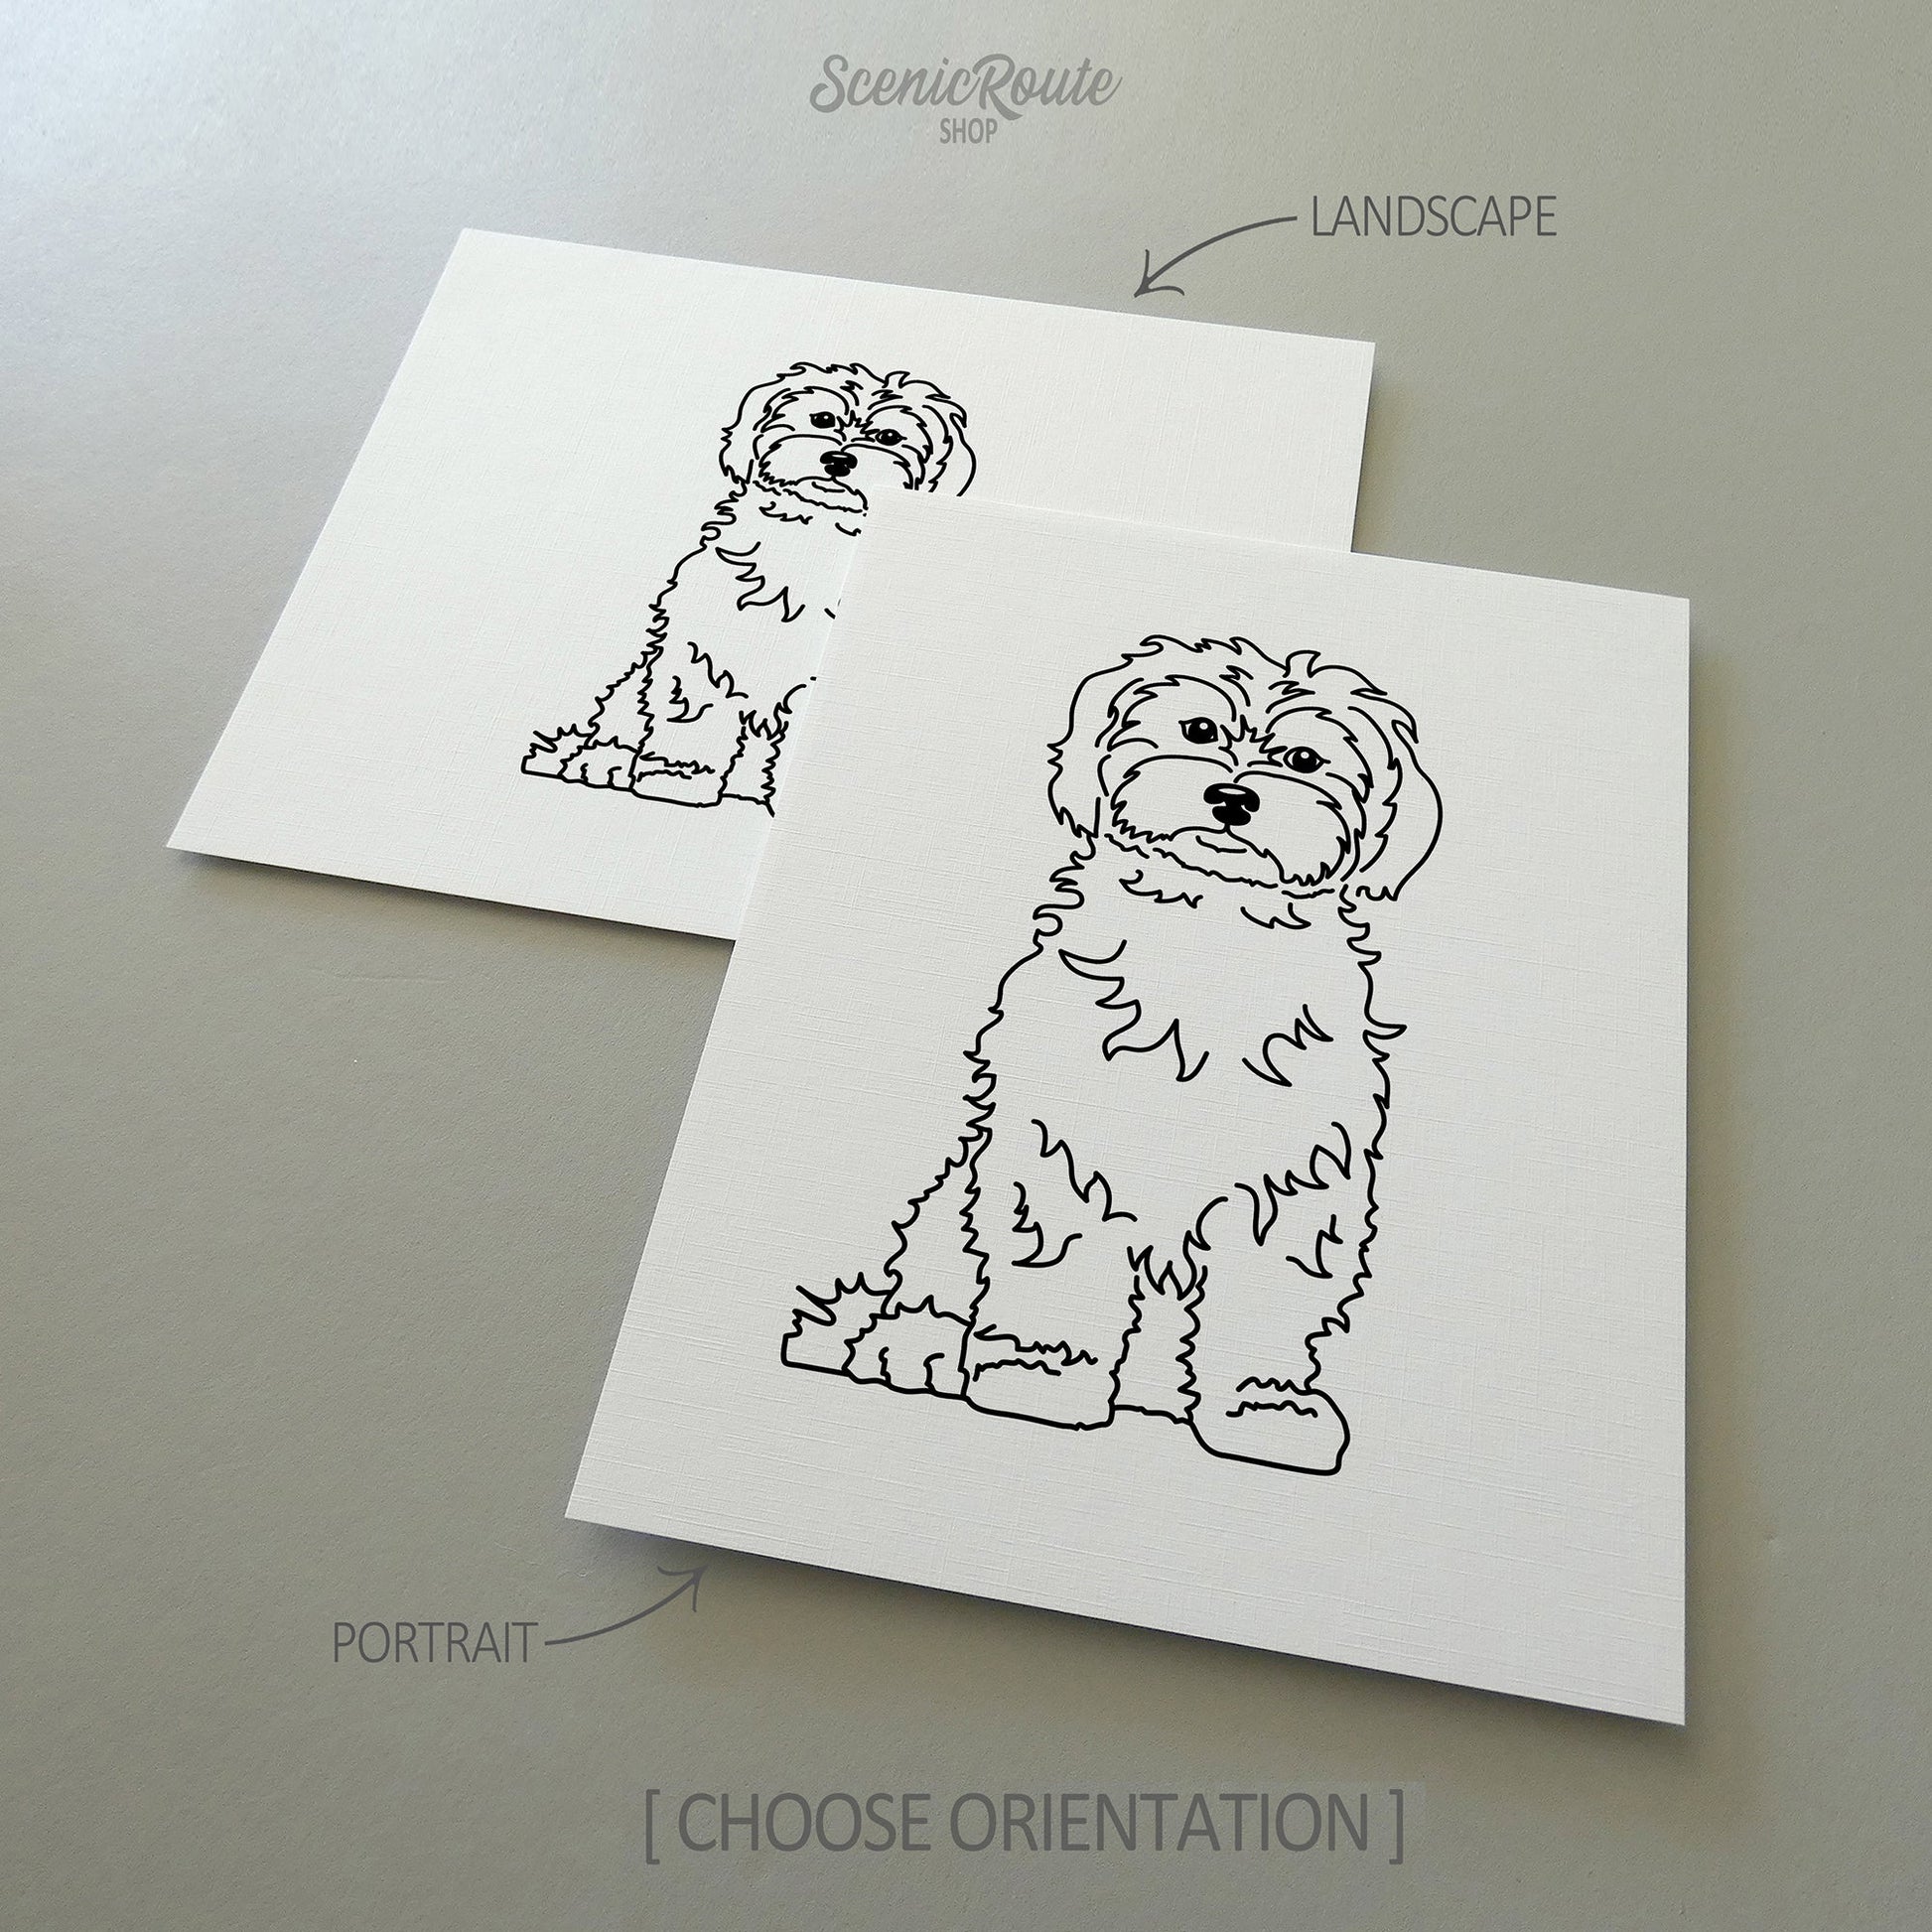 Two line art drawings of a Maltese dog on white linen paper with a gray background.  The pieces are shown in portrait and landscape orientation for the available art print options.